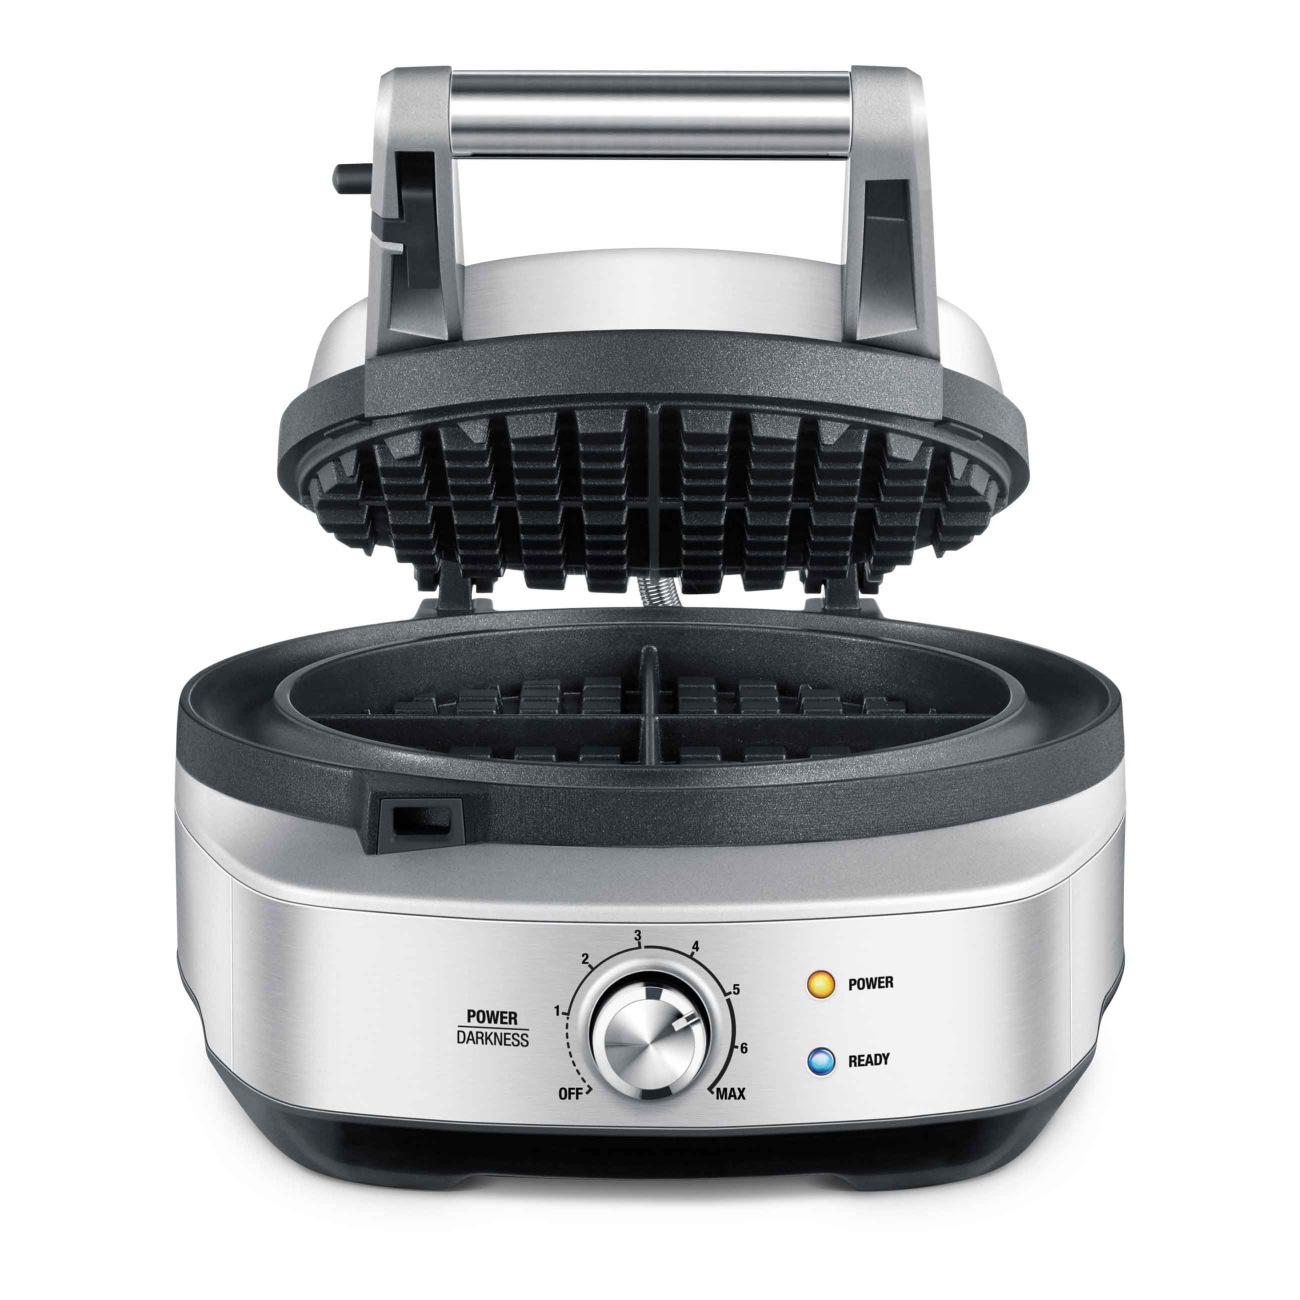 the No-mess Waffle® Waffle Maker • Breville